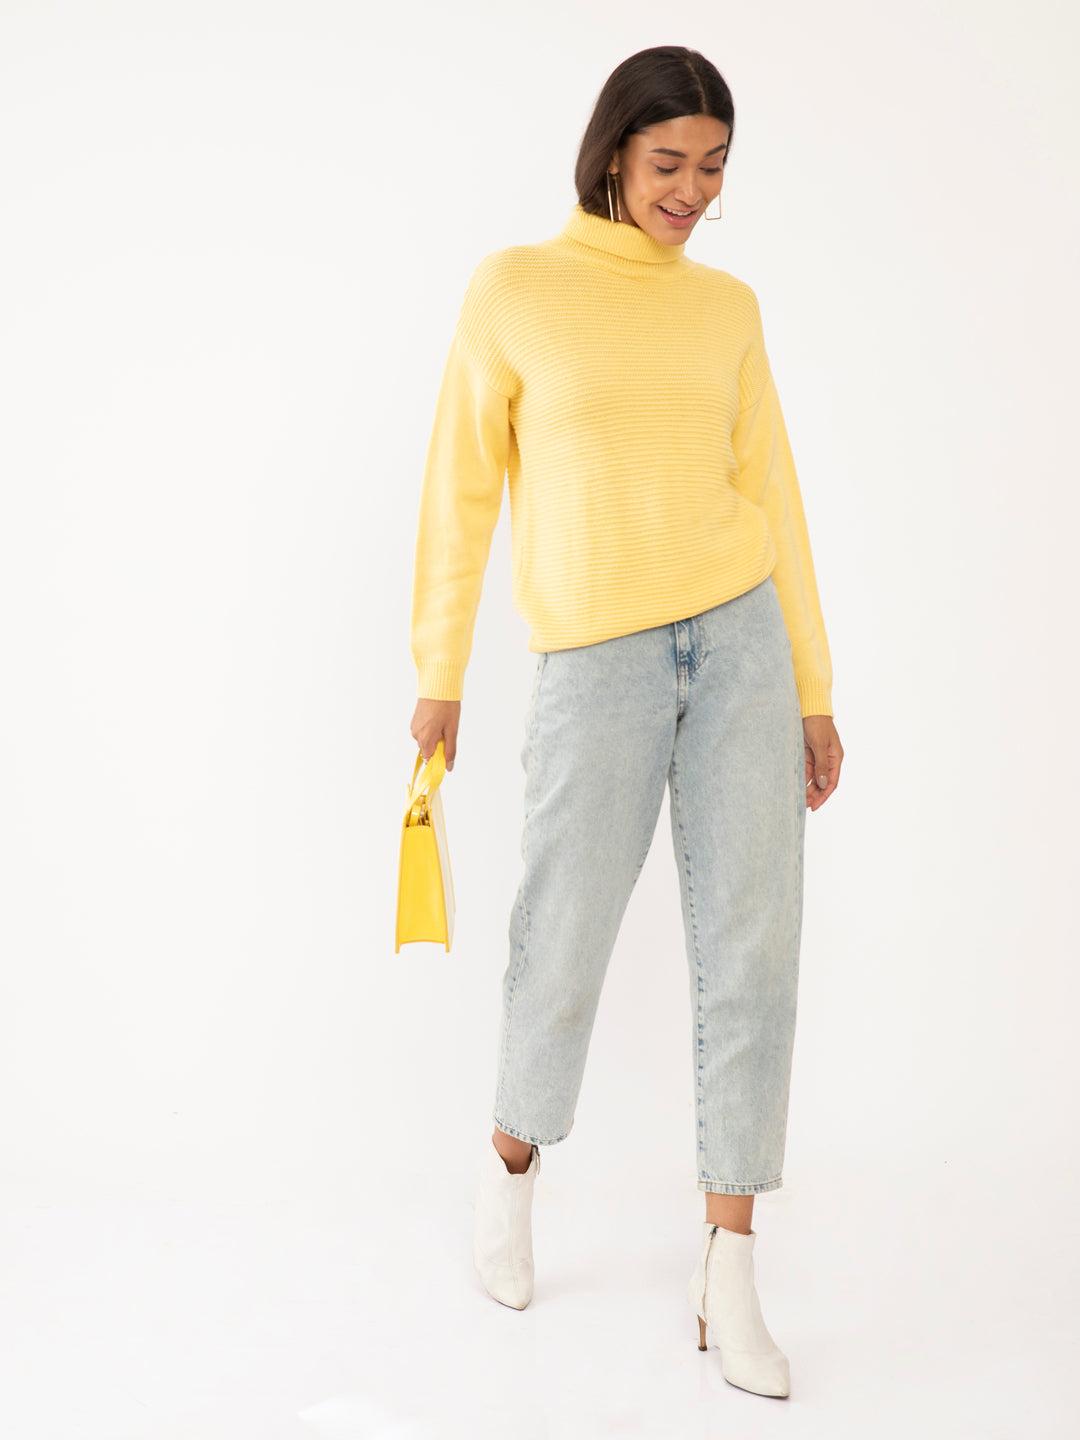 yellow-solid-sweater-for-women